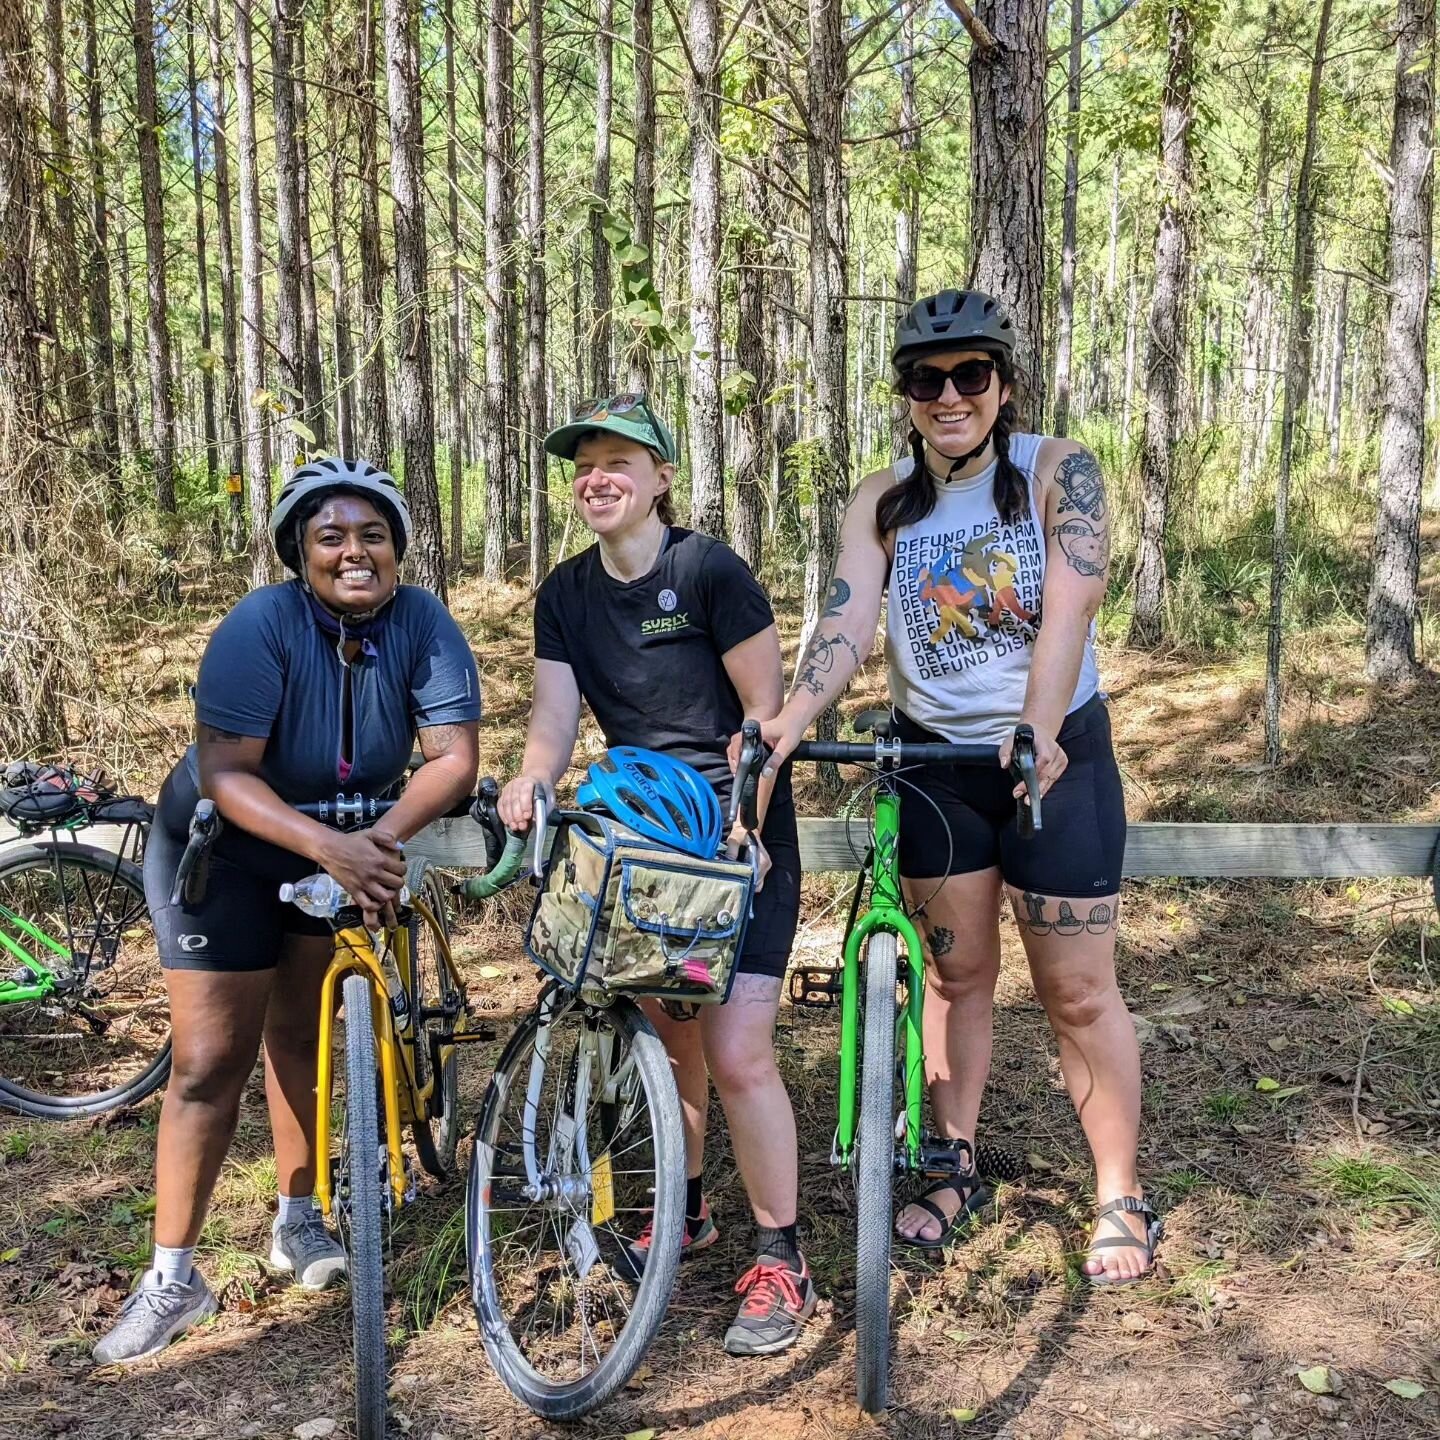 📍Ancestral lands of the Mvskoke peoples

🚲 Thank you @rar.atlanta for such a great ride!!! We didn't camp out, but it was a beautiful day and fun terrain 🎉.

It was a dream to get to know some southern bike folks &amp; queers 🌈!!

💘 Can't wait t